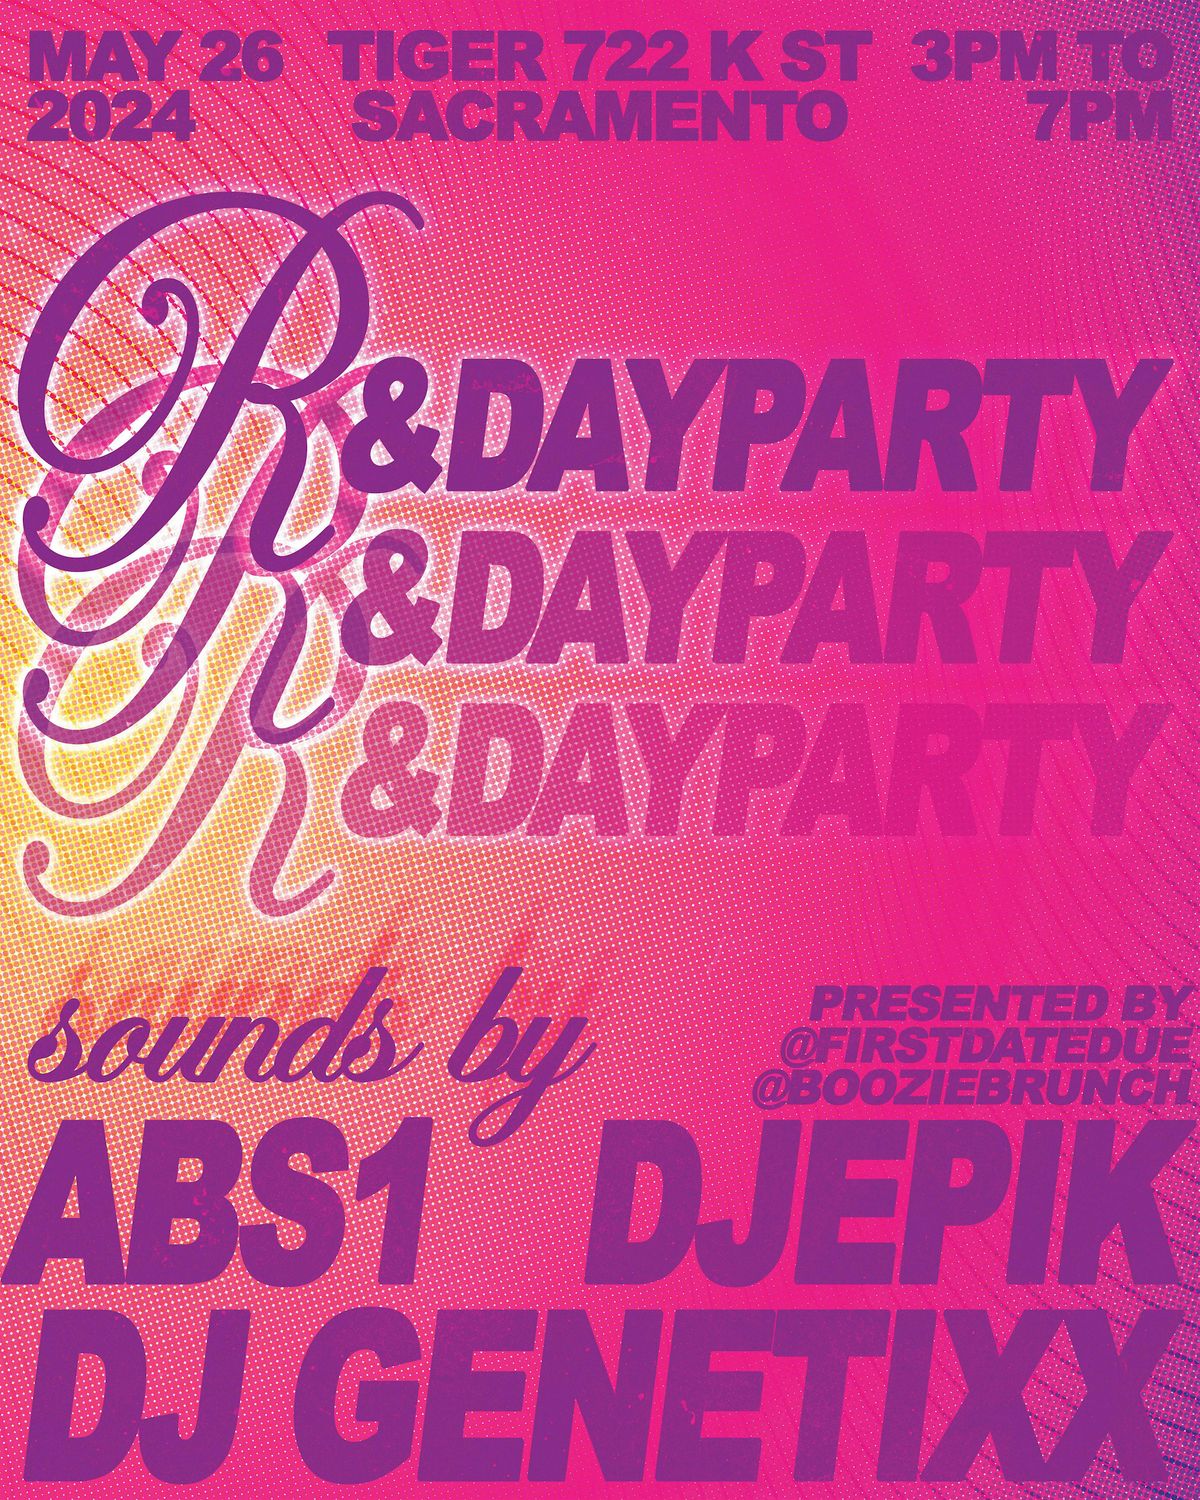 R&DAYPARTY @ TIGER \/\/ SUNDAY, MAY 26TH